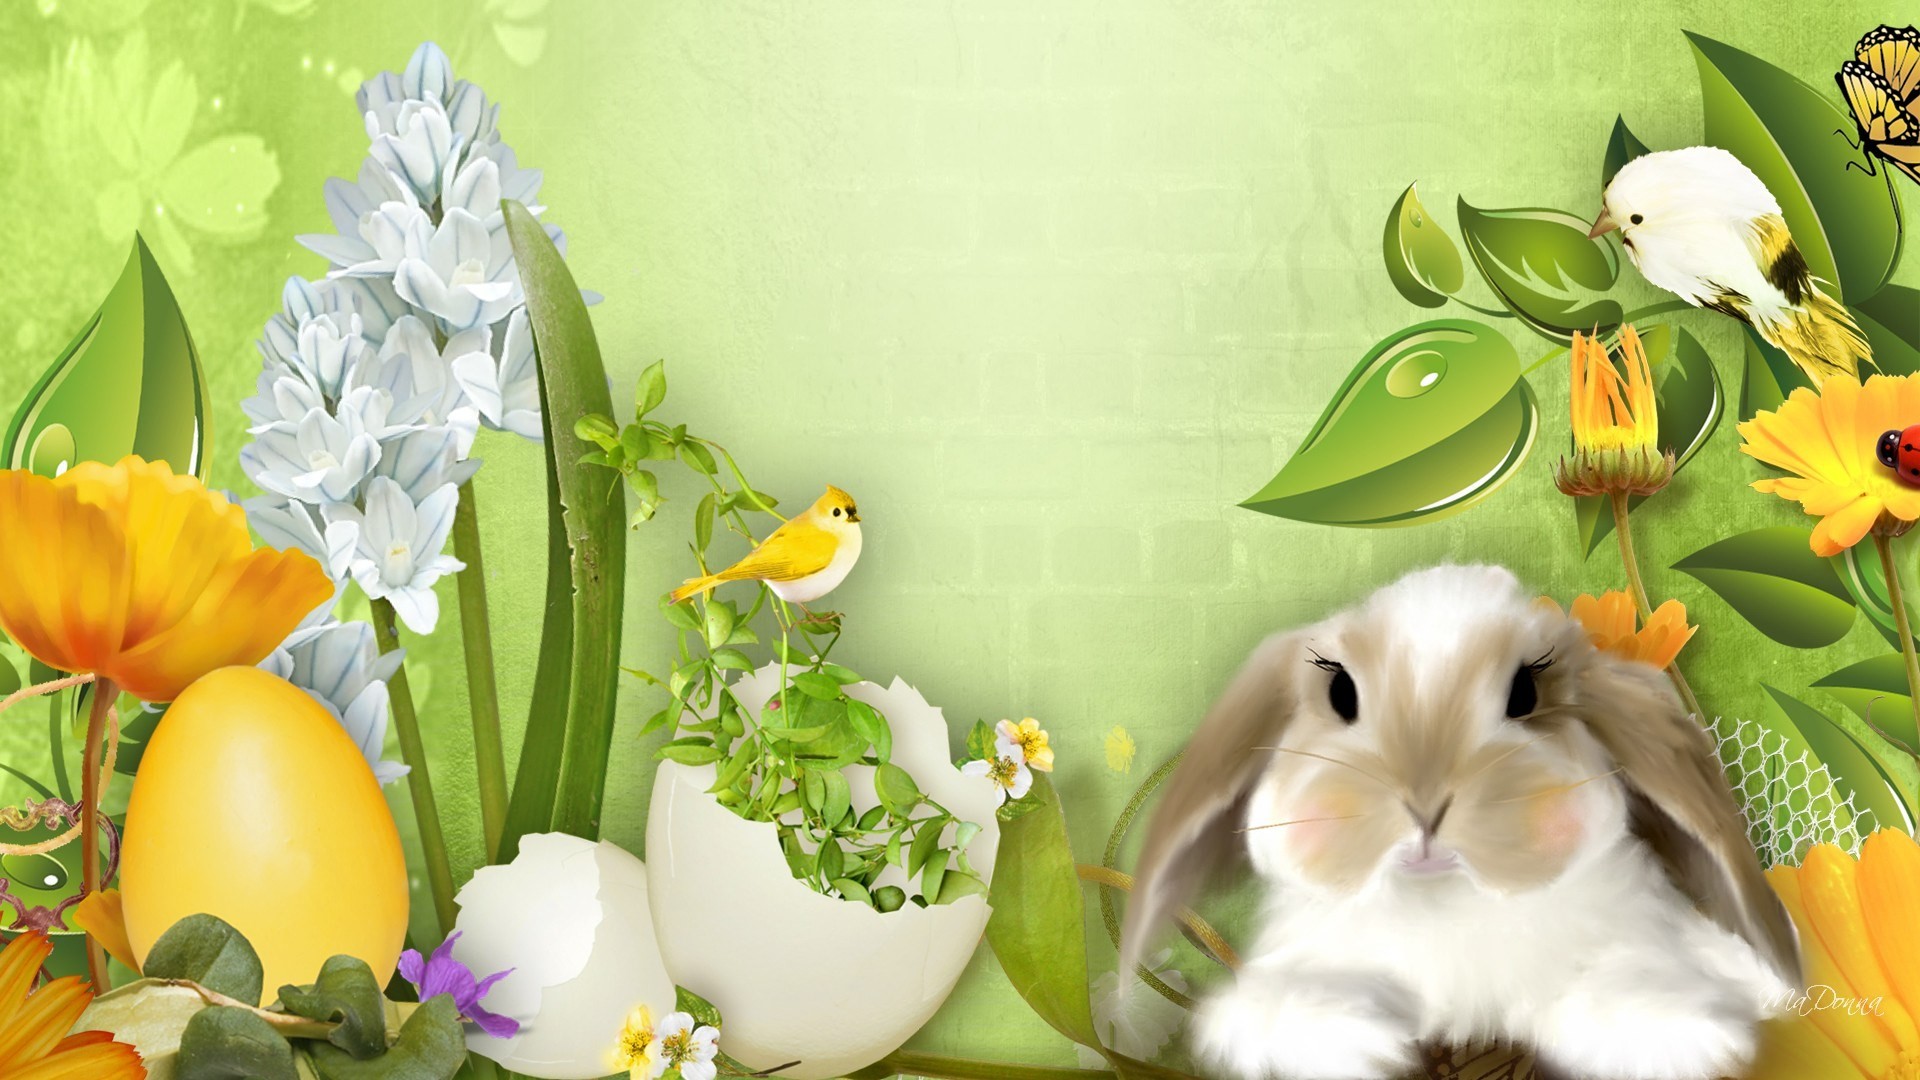 1920x1080 Free download easter image - easter category